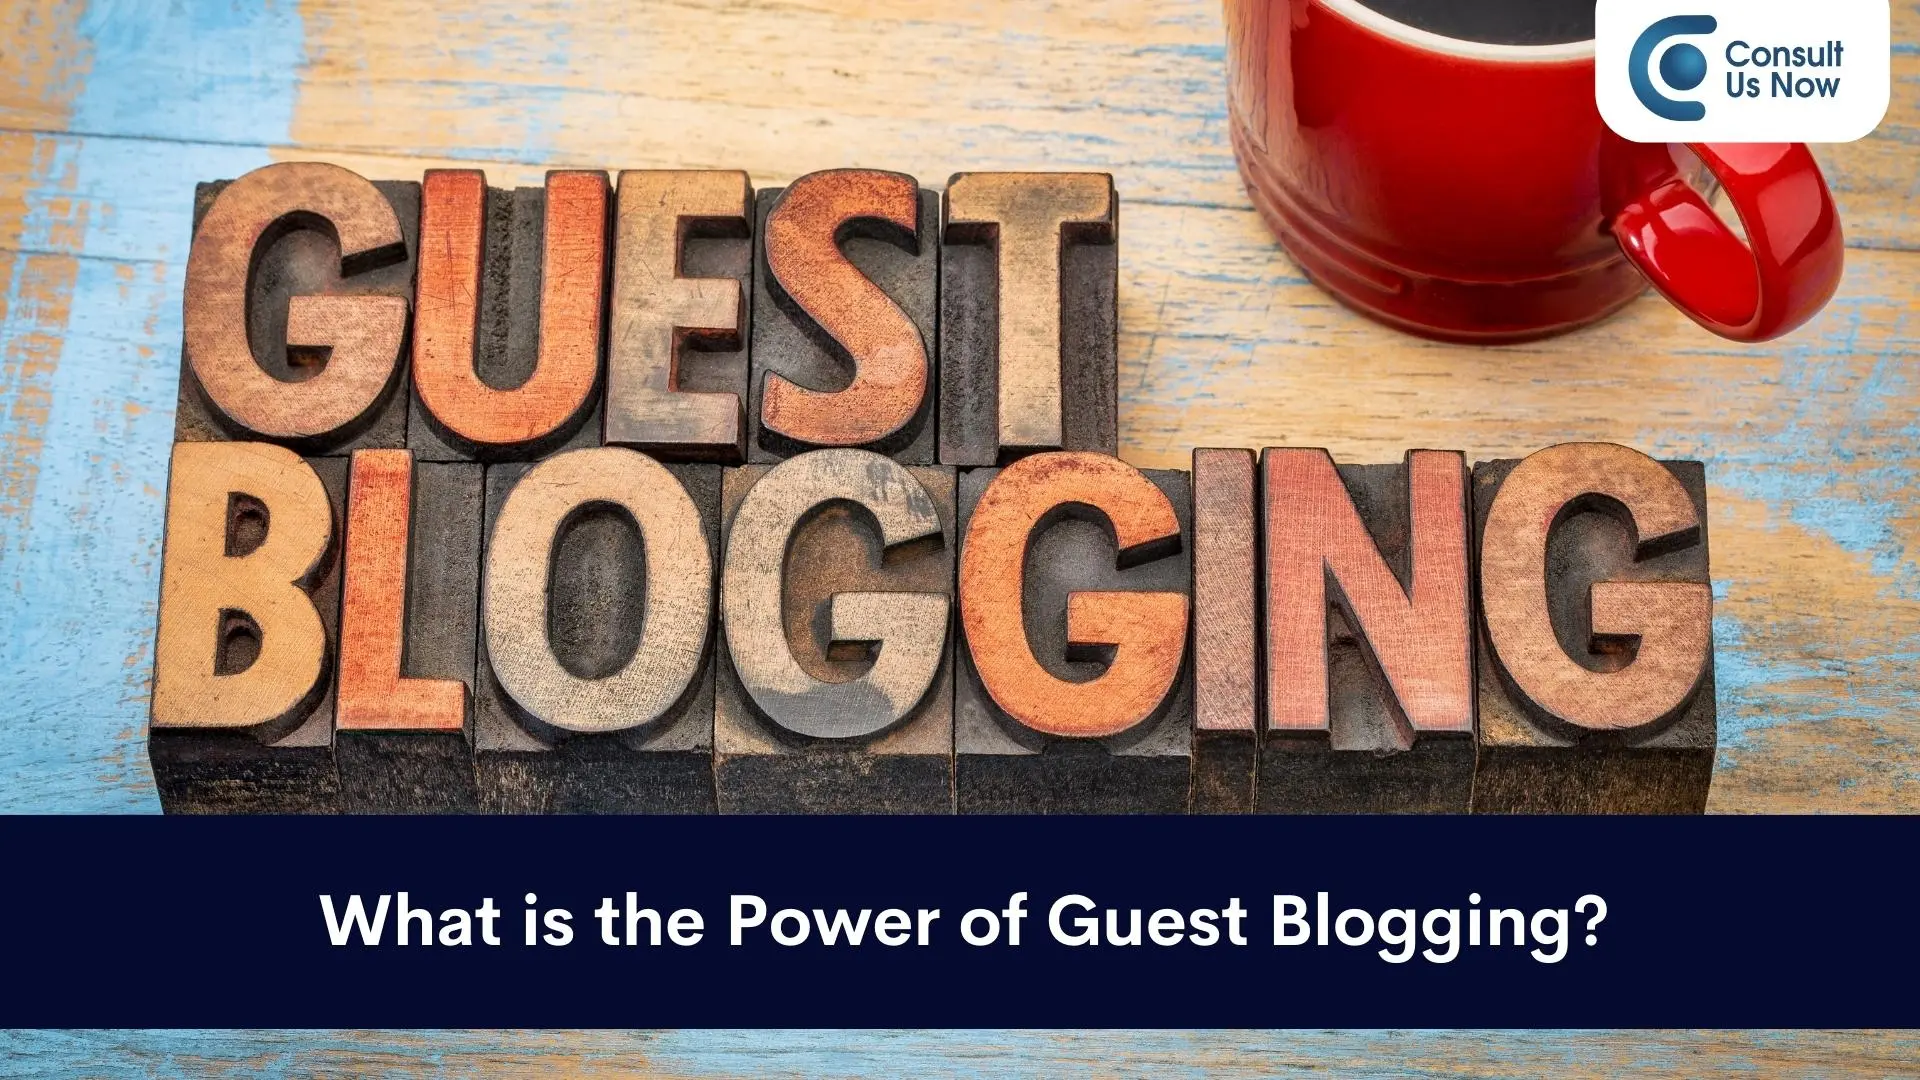 Power of Guest blogging